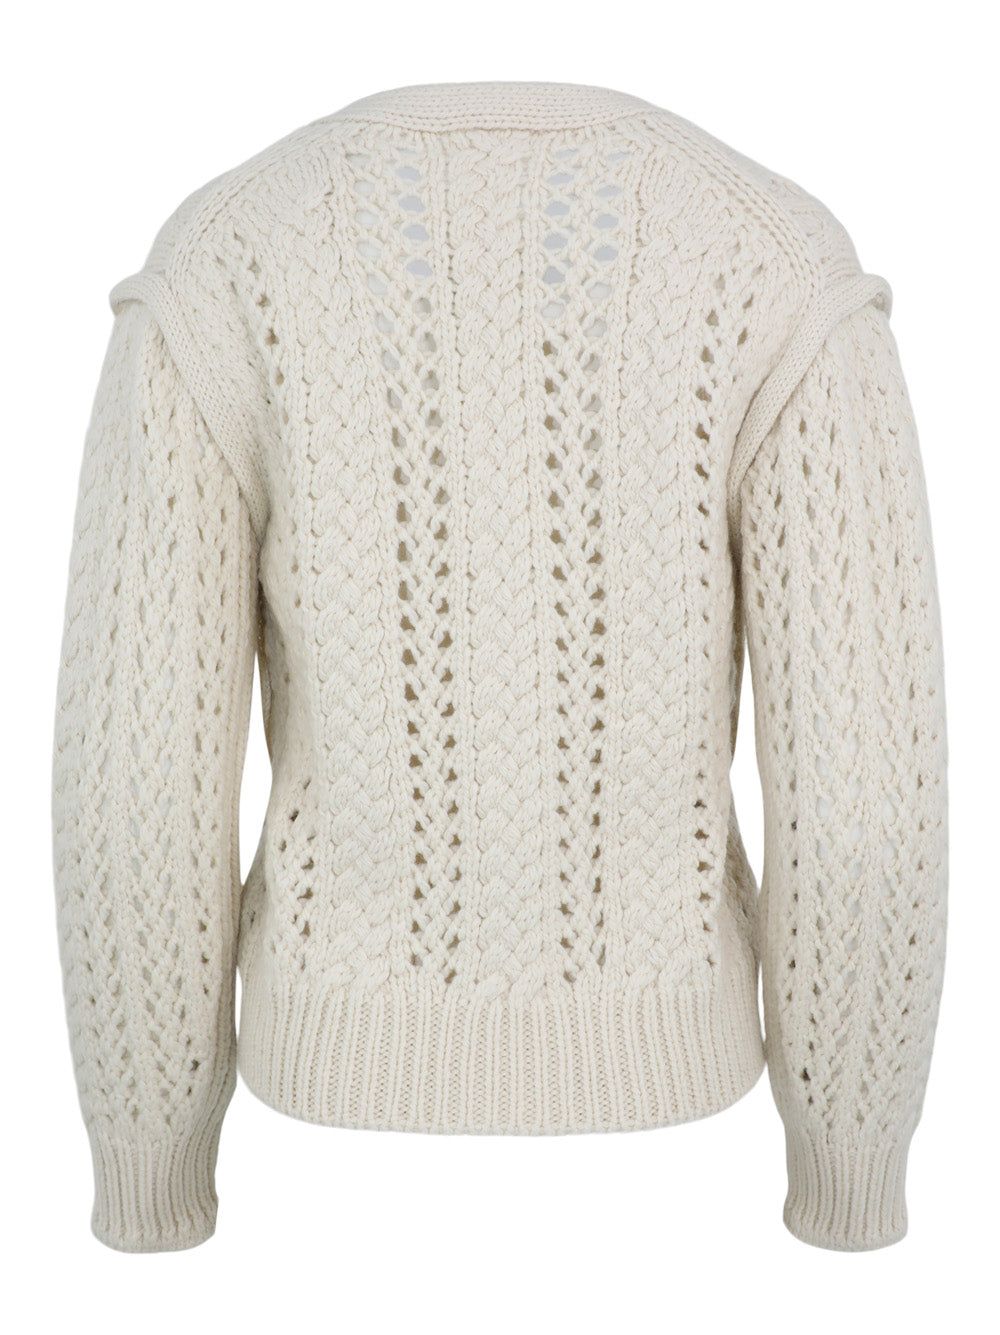 A.L.C. Chandler Cardigan in Off-White